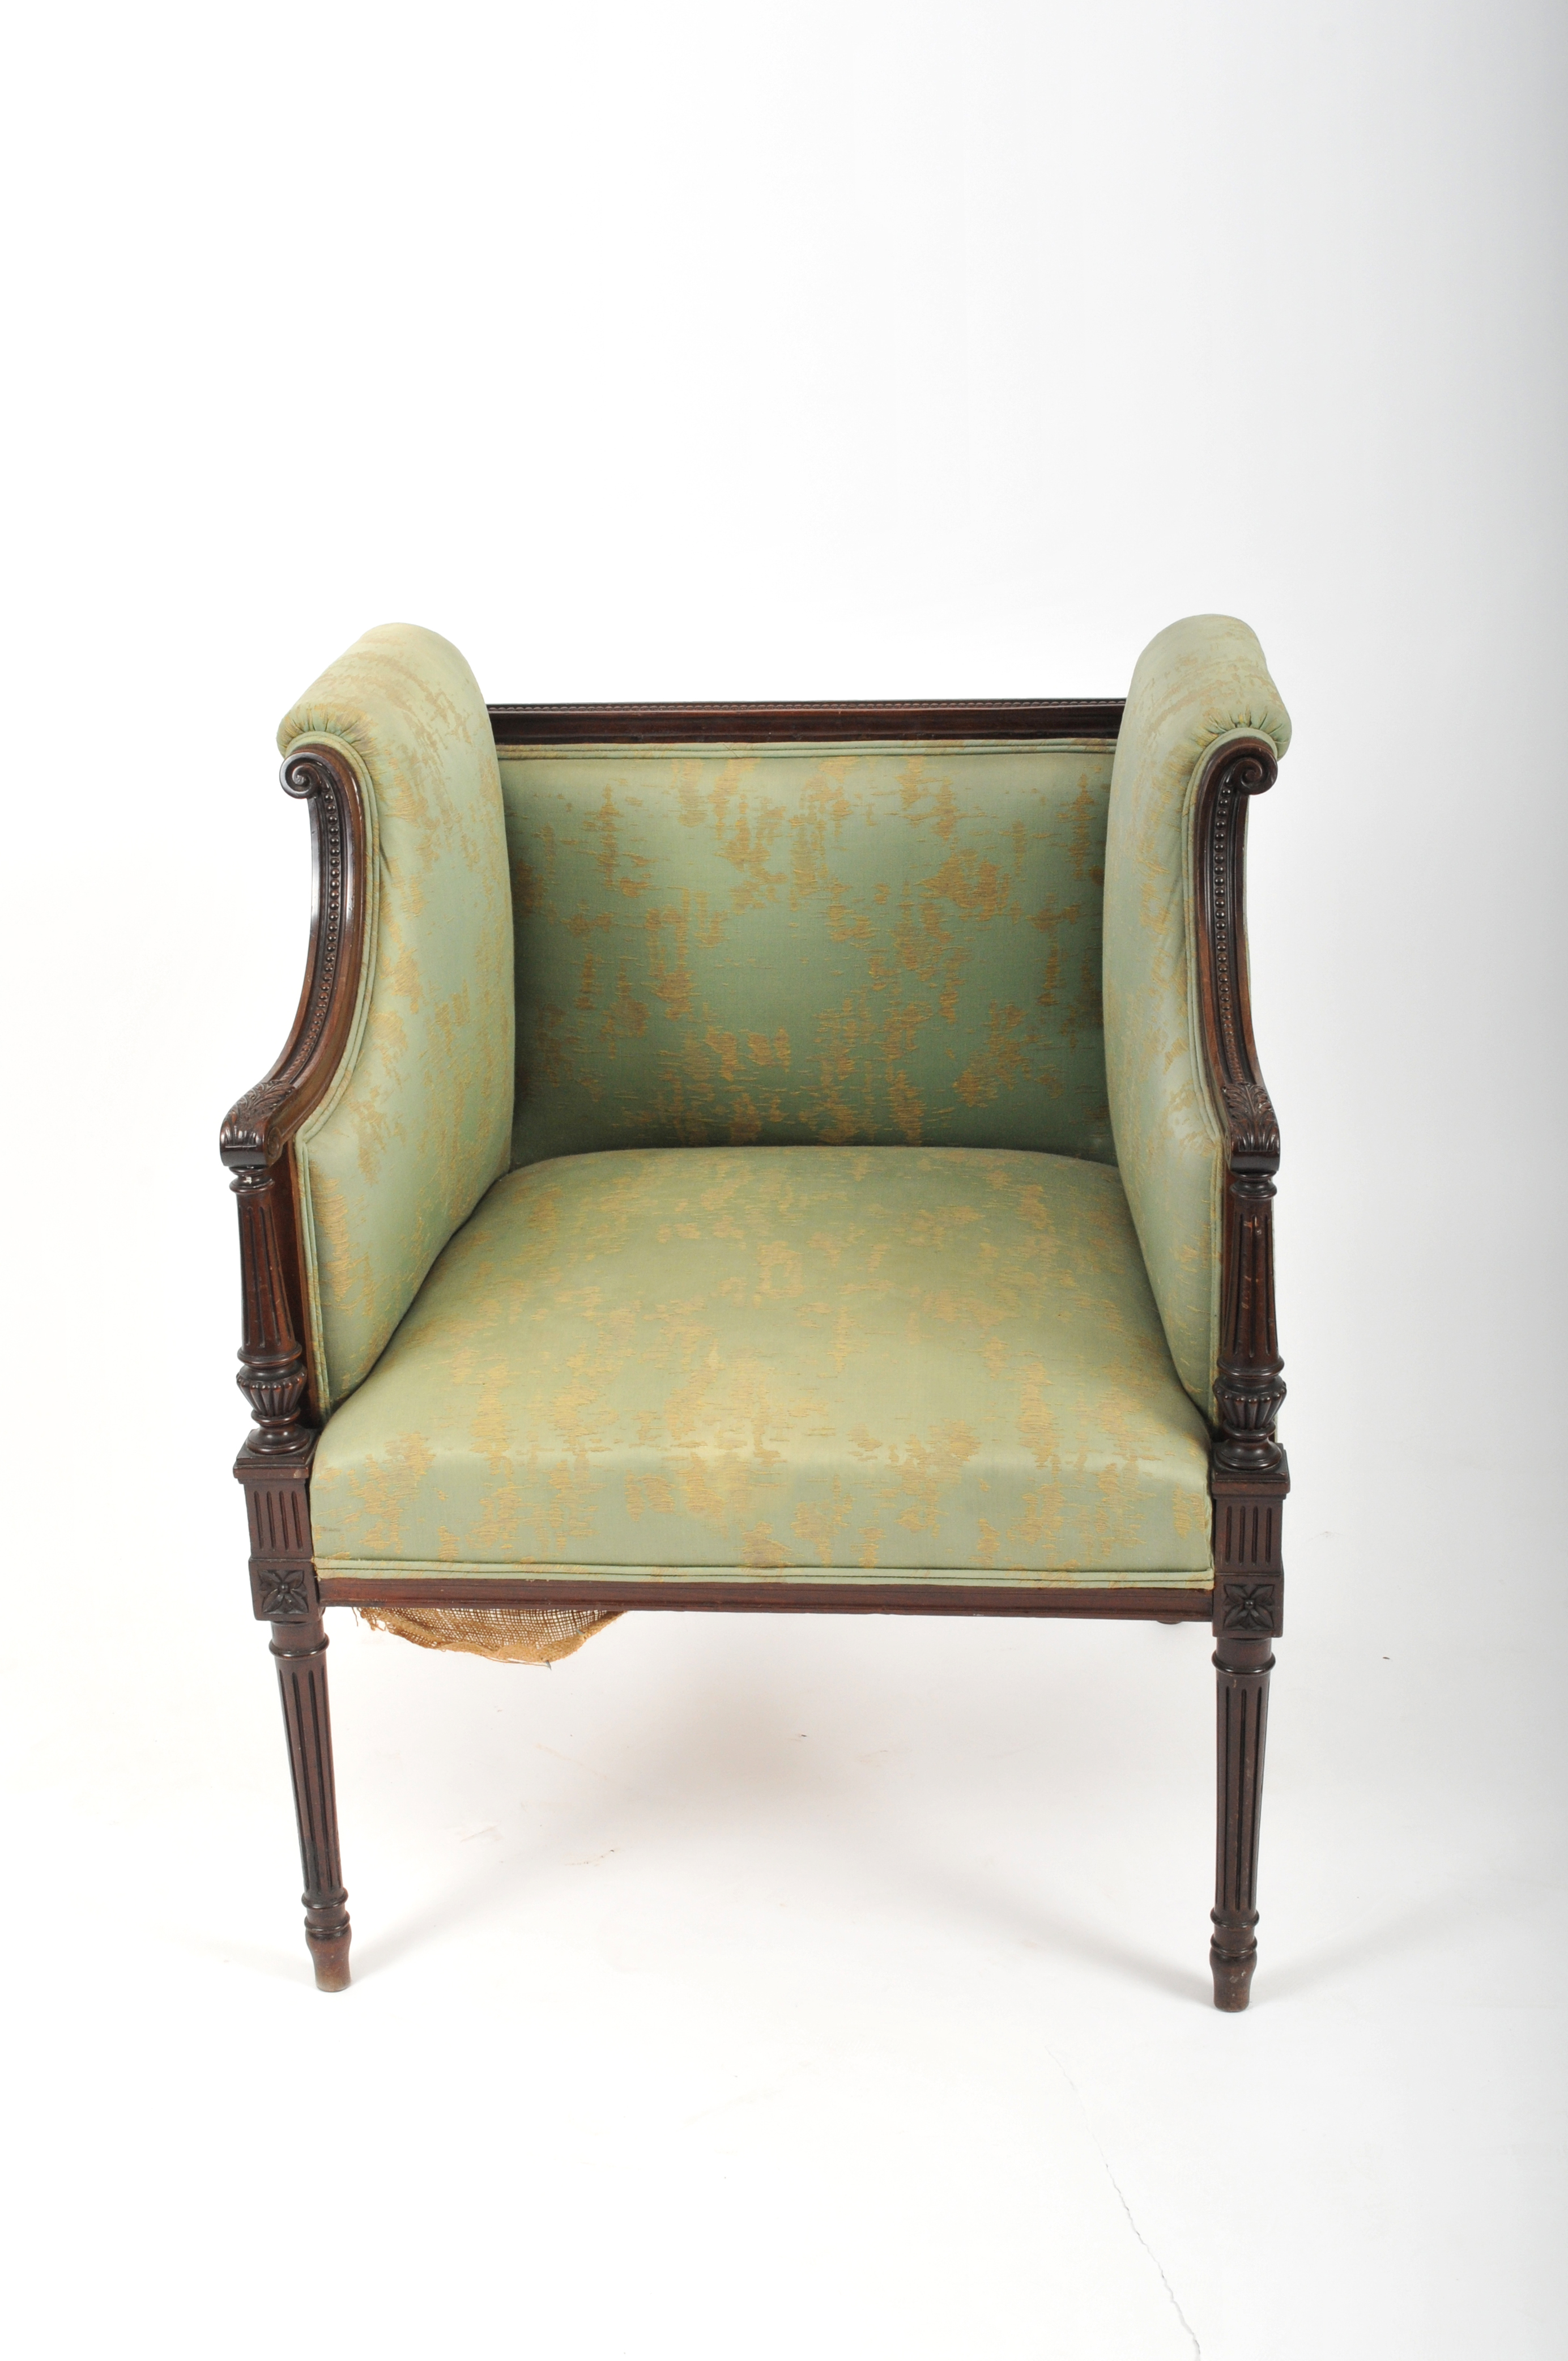 A rosewood framed upholstered box tub chair - Image 3 of 3